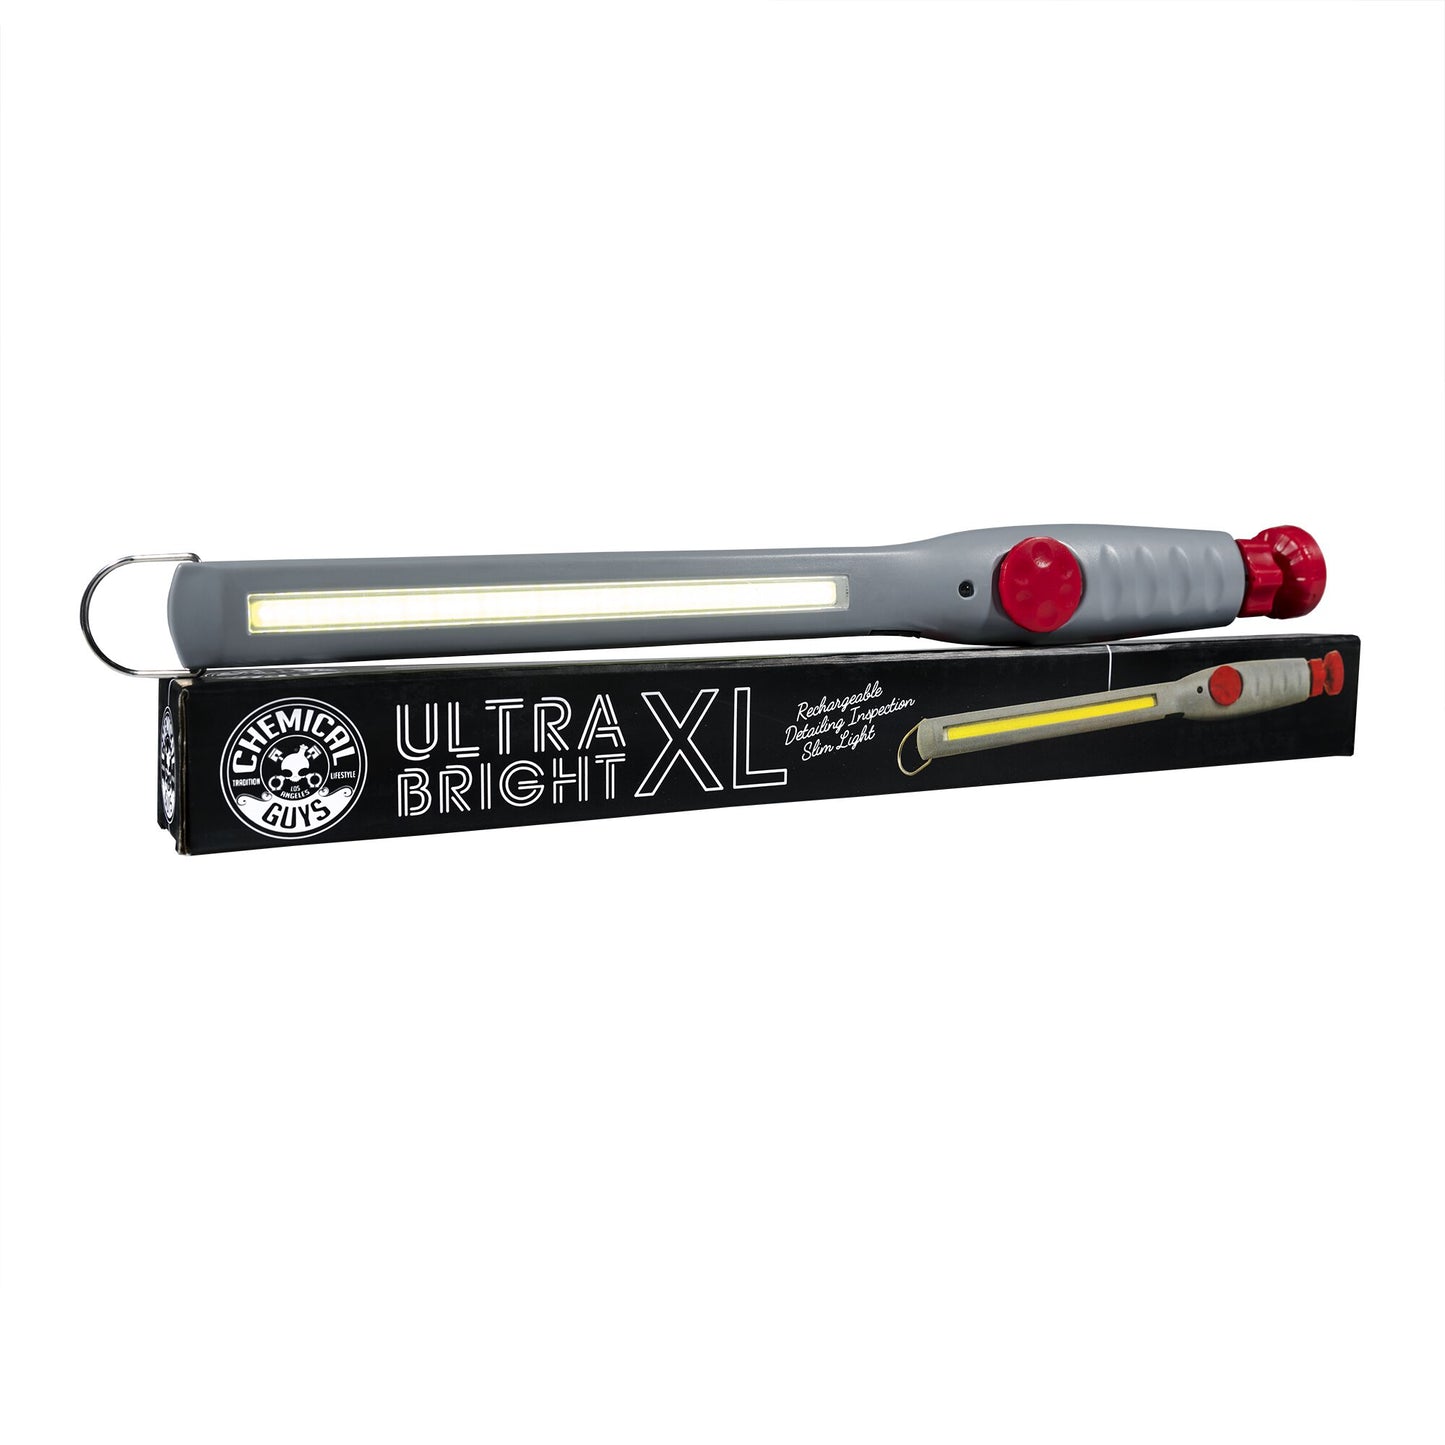 Ultra Bright XL Rechargeable Detailing Inspection LED Slim Light